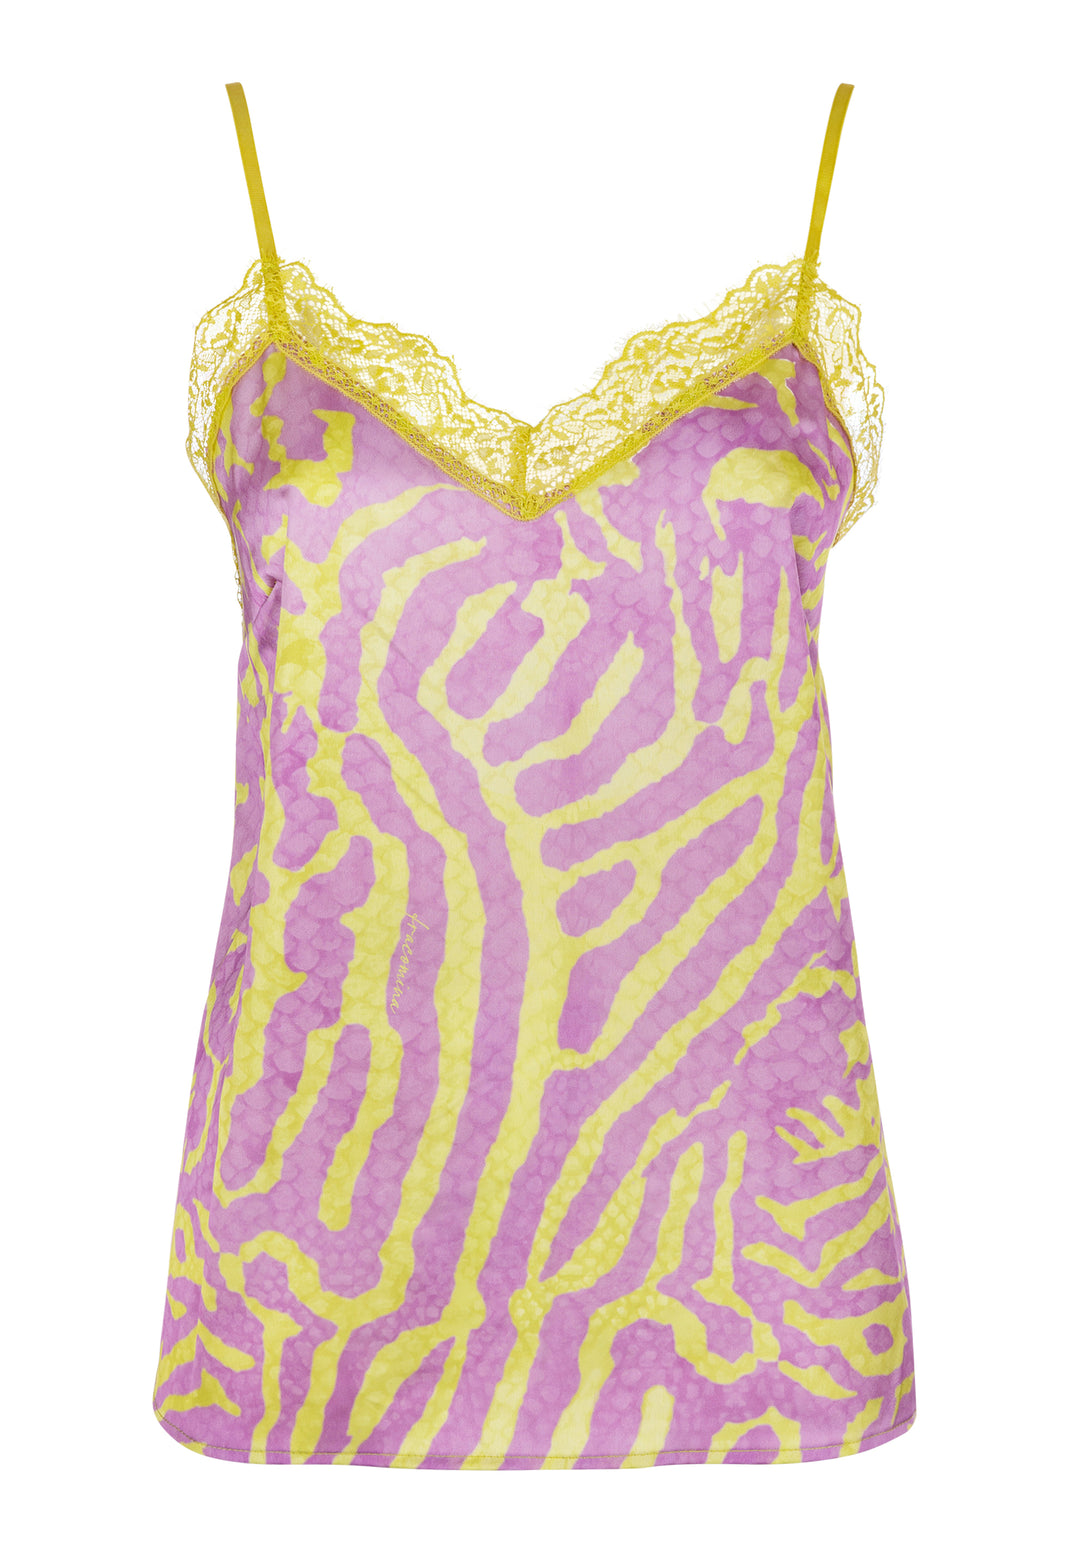 Tank top lingerie style with animalier pattern